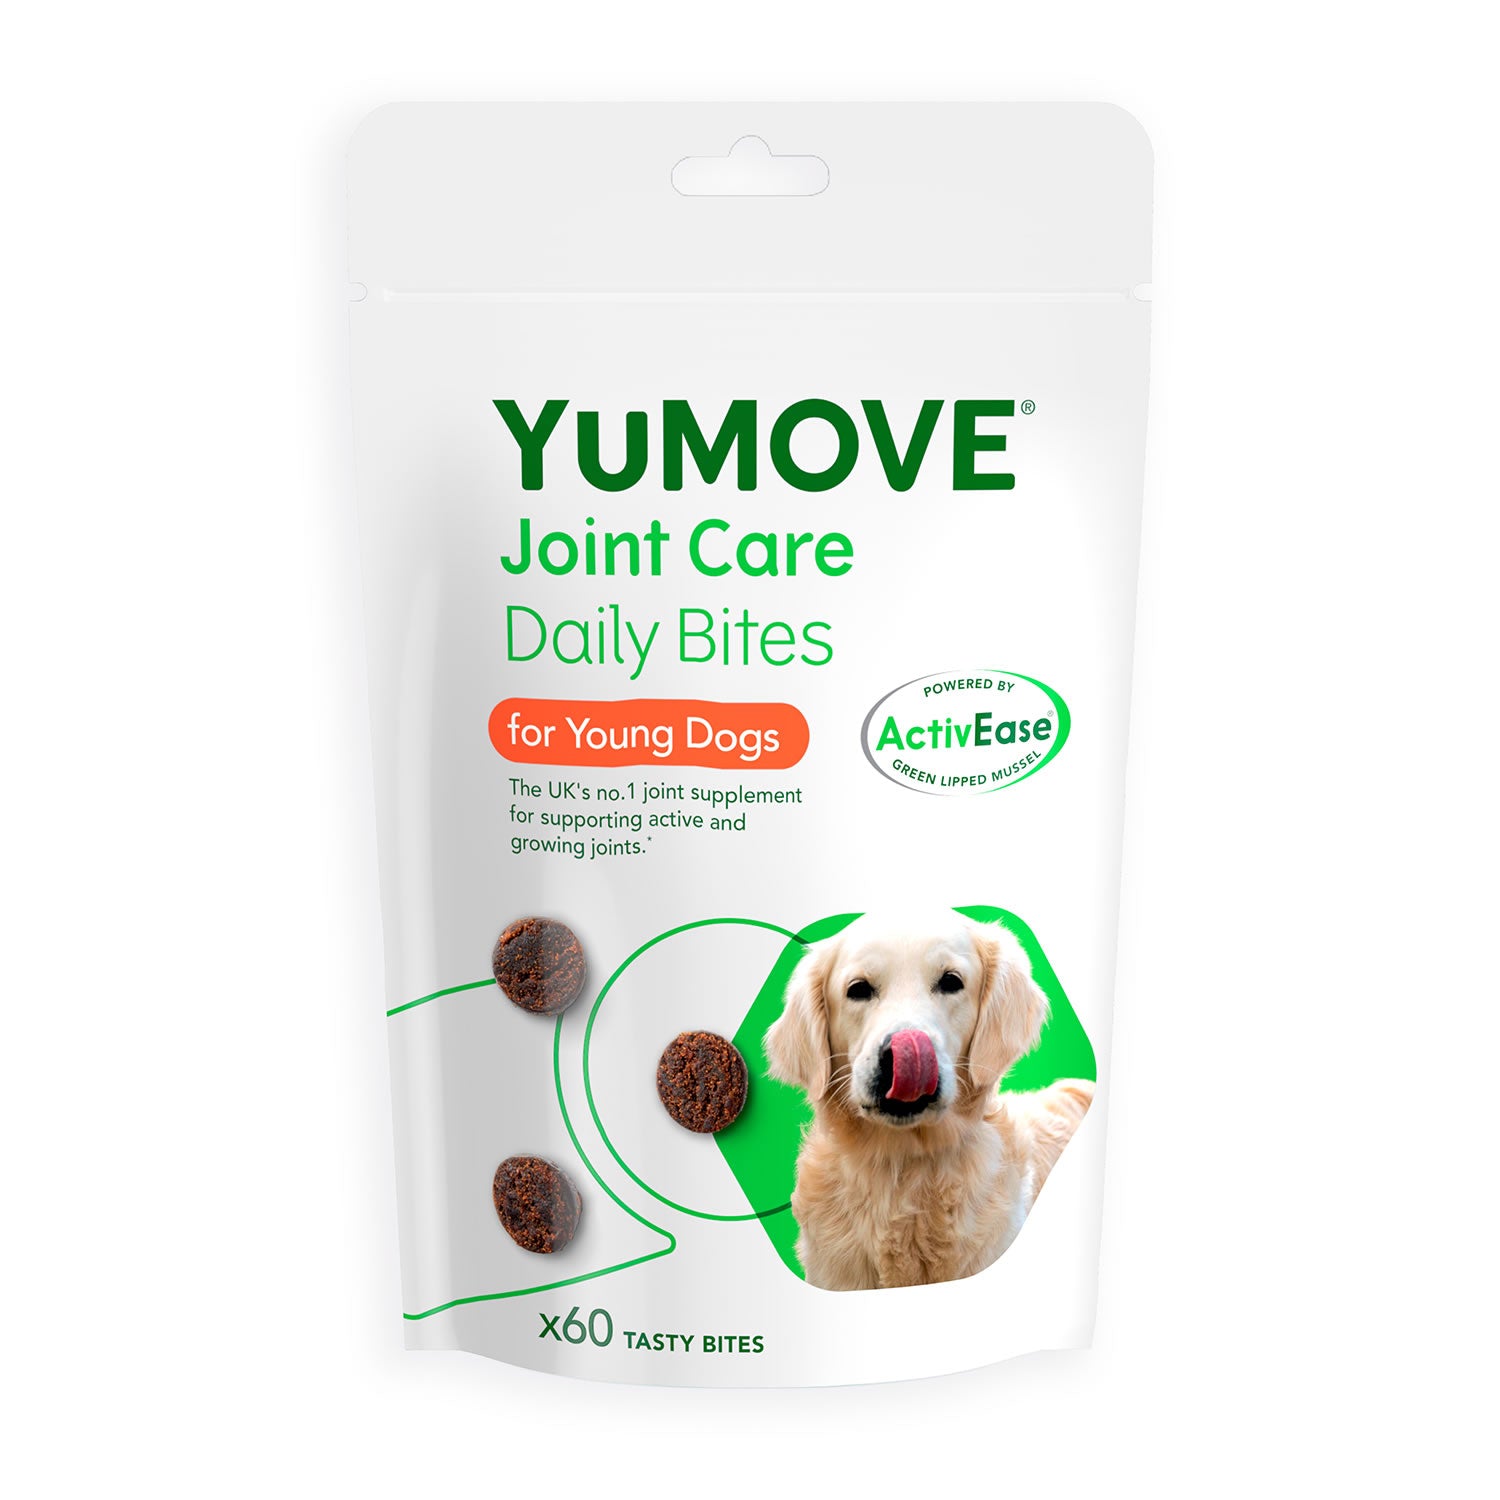 YuMOVE Joint Care Daily Bites For Young Dogs - 60 Bites